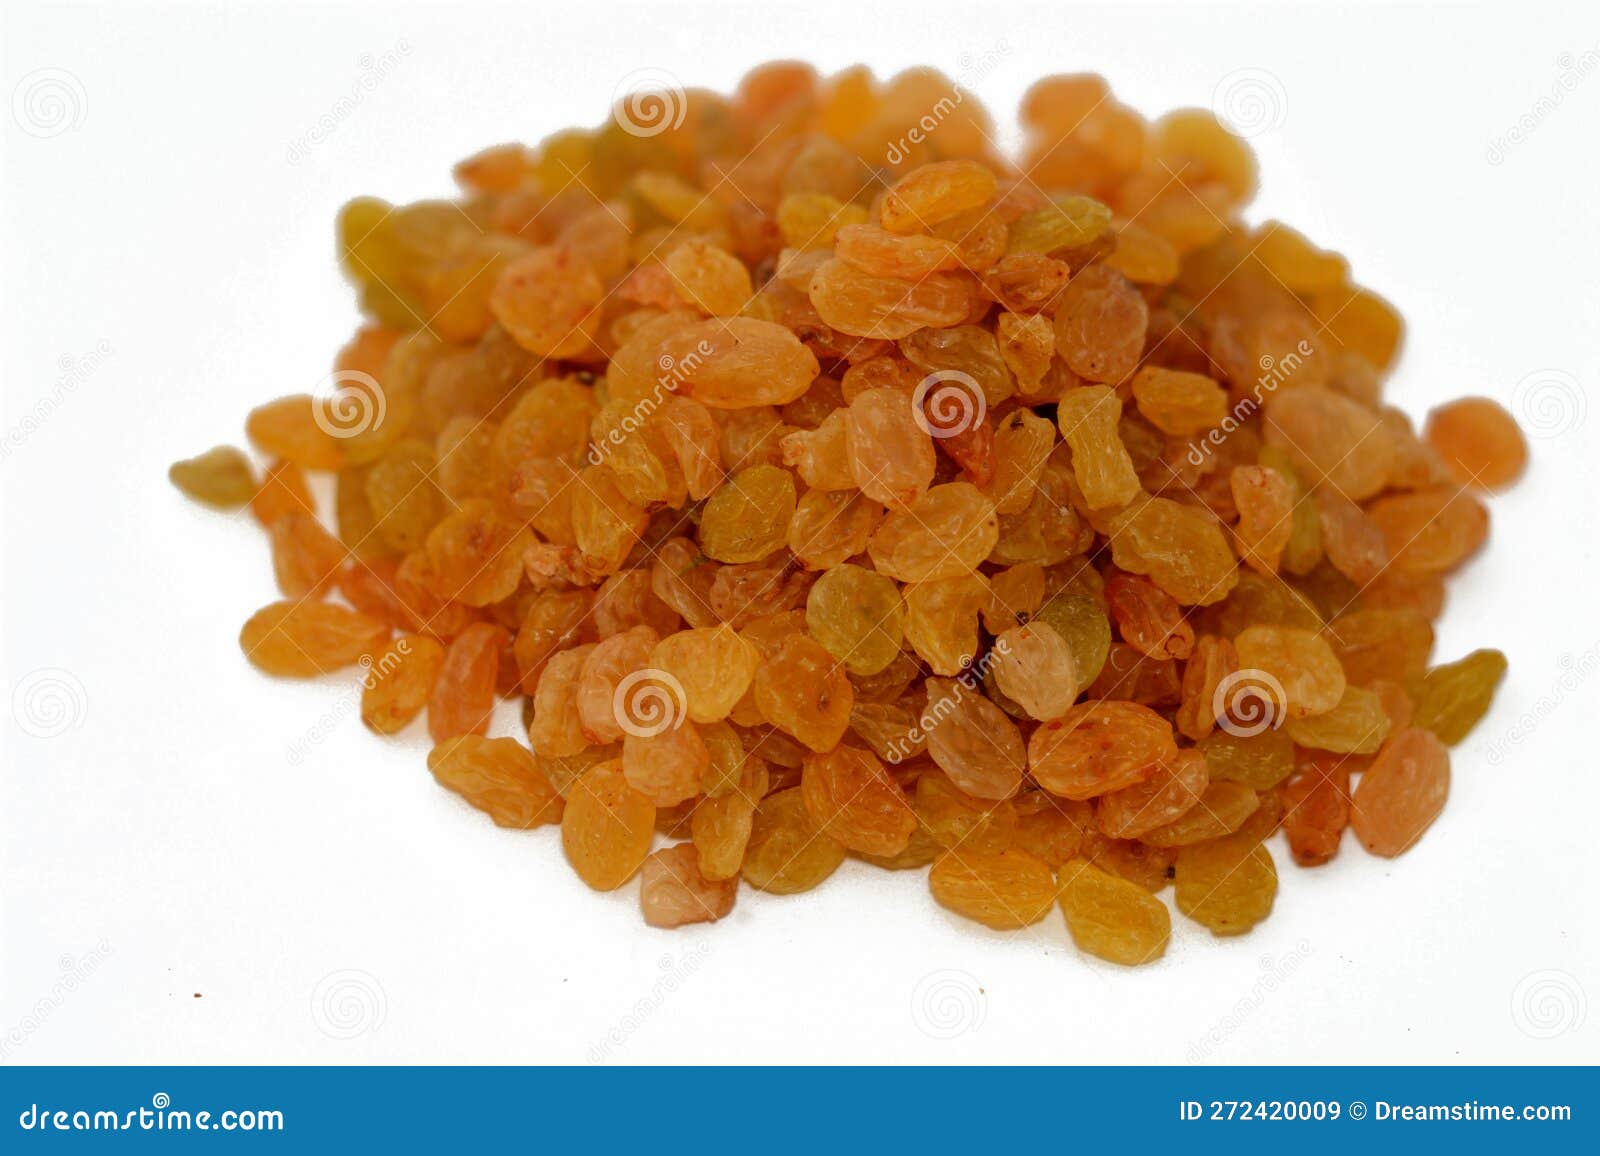 Pile of Raisins, a Dried Grape, Raisins are Produced in Many Regions of ...